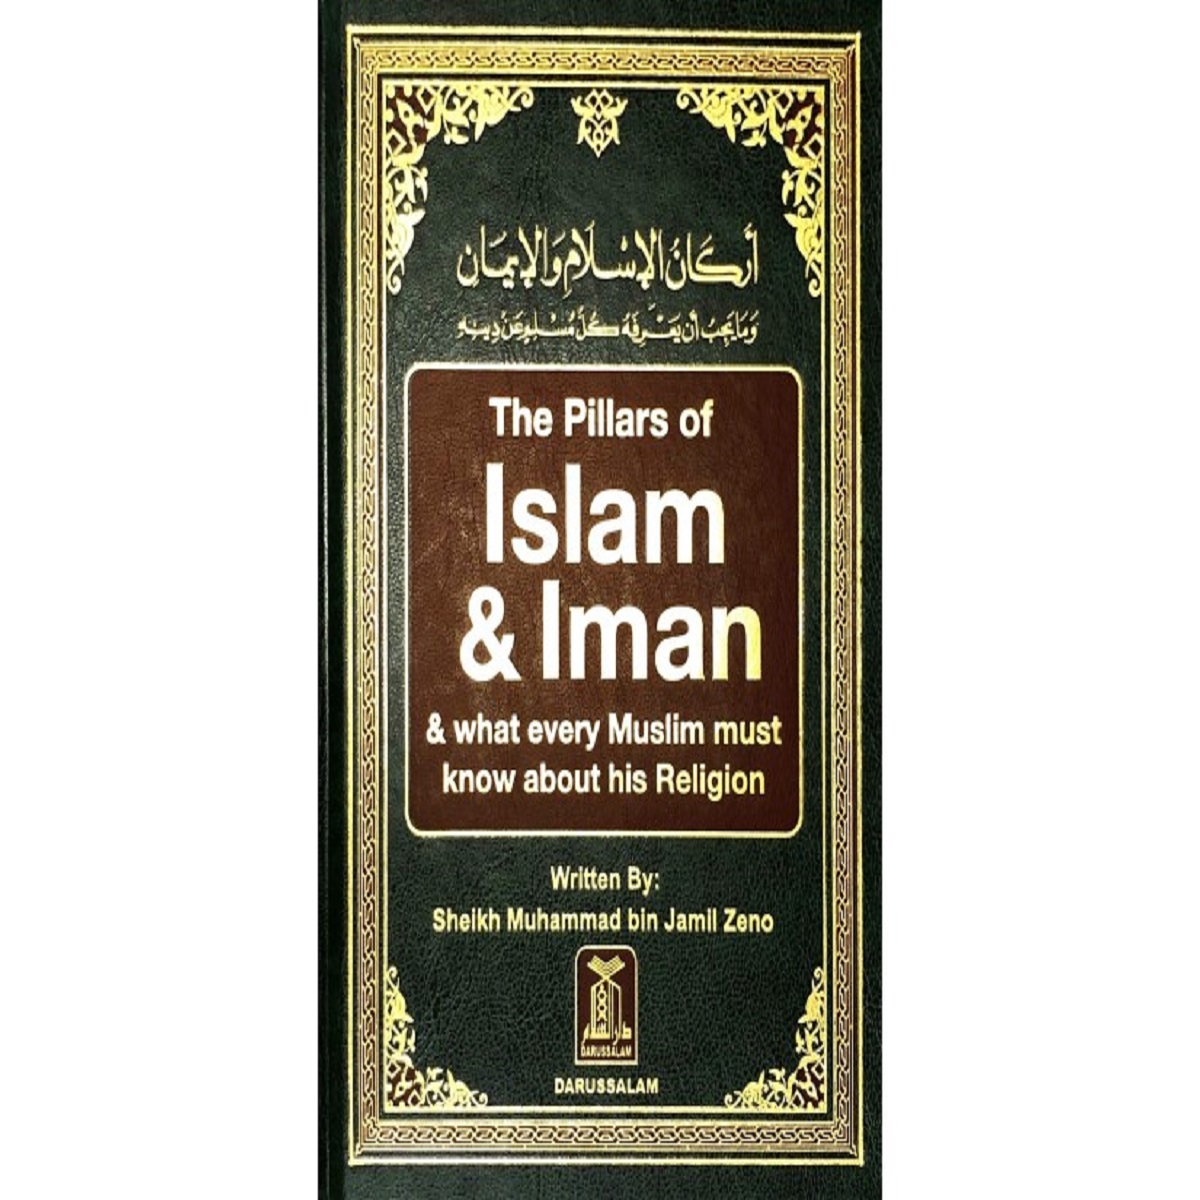 https://www.tarbiyahbooksplus.com/shop/hadith-and-sunnah/the-pillars-of-islam-and-iman/